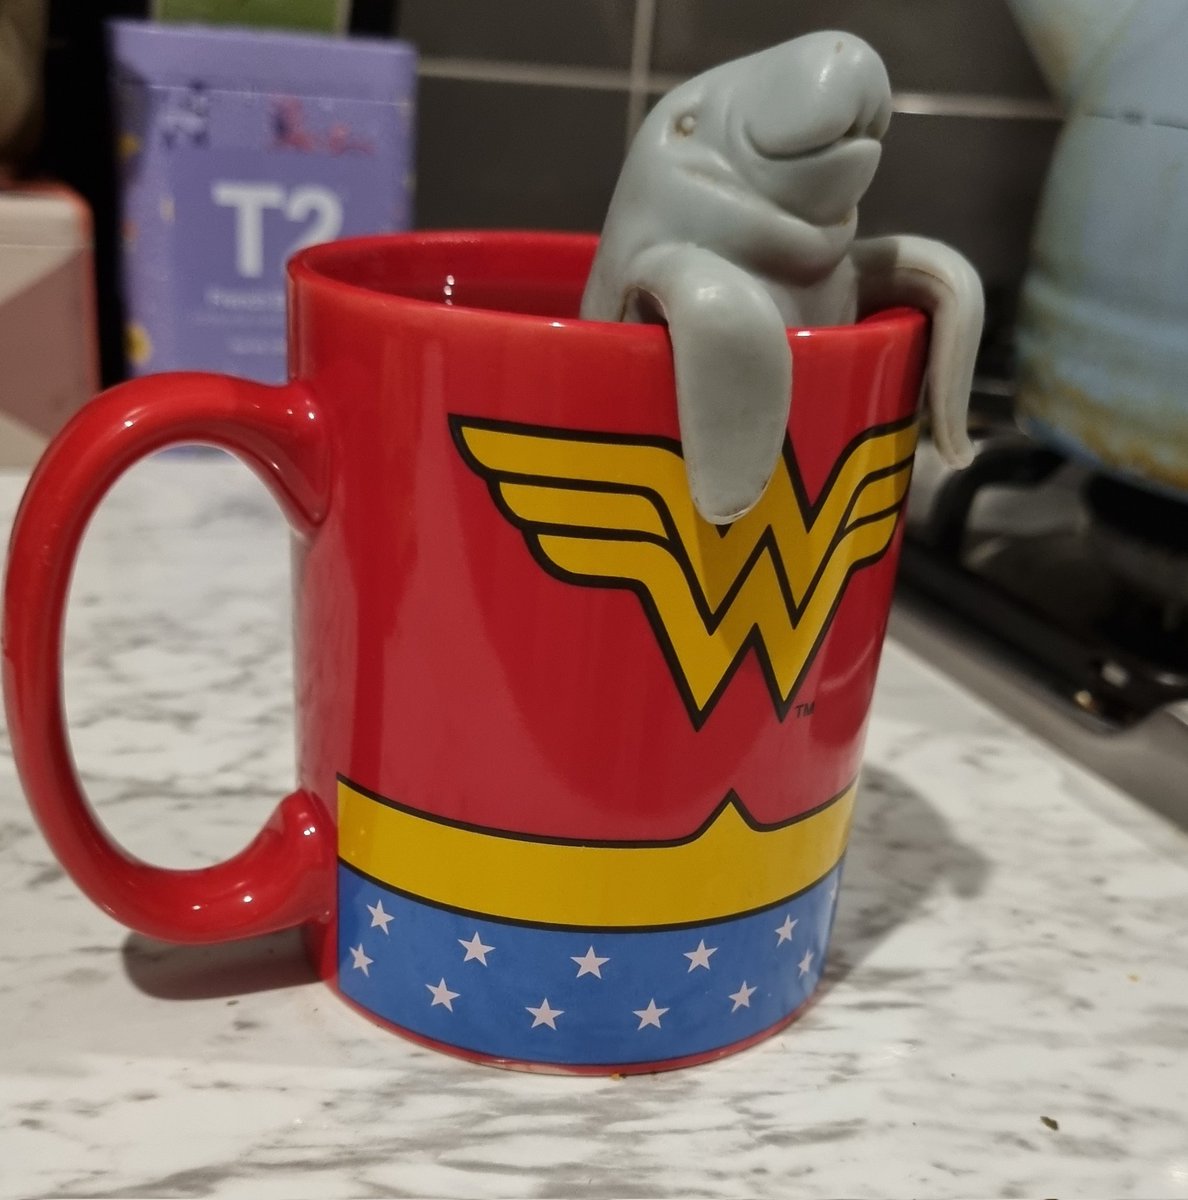 First day back from #matleave 🤱! I will need the right fuel in the right mug to set the mood. Green tea and #WonderWoman! 
@Momademia #WomenInSTEM